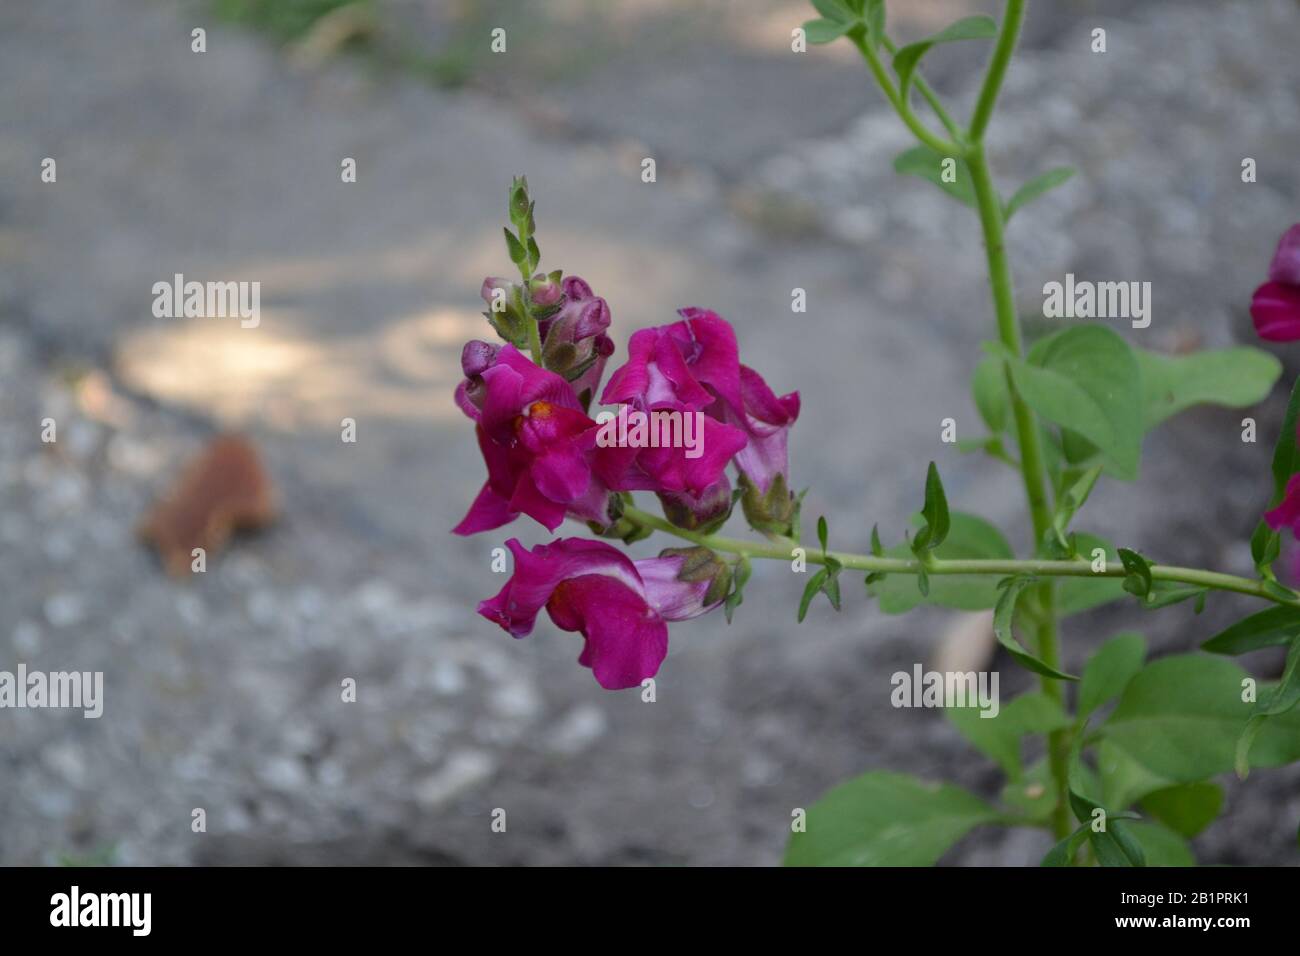 Snapdragon. Antirrhinum. Perennial. Beautiful unusual flower. Inflorescences of fuchsia-colored. Garden. A flower bed. Green leaves. Summer day. Horiz Stock Photo